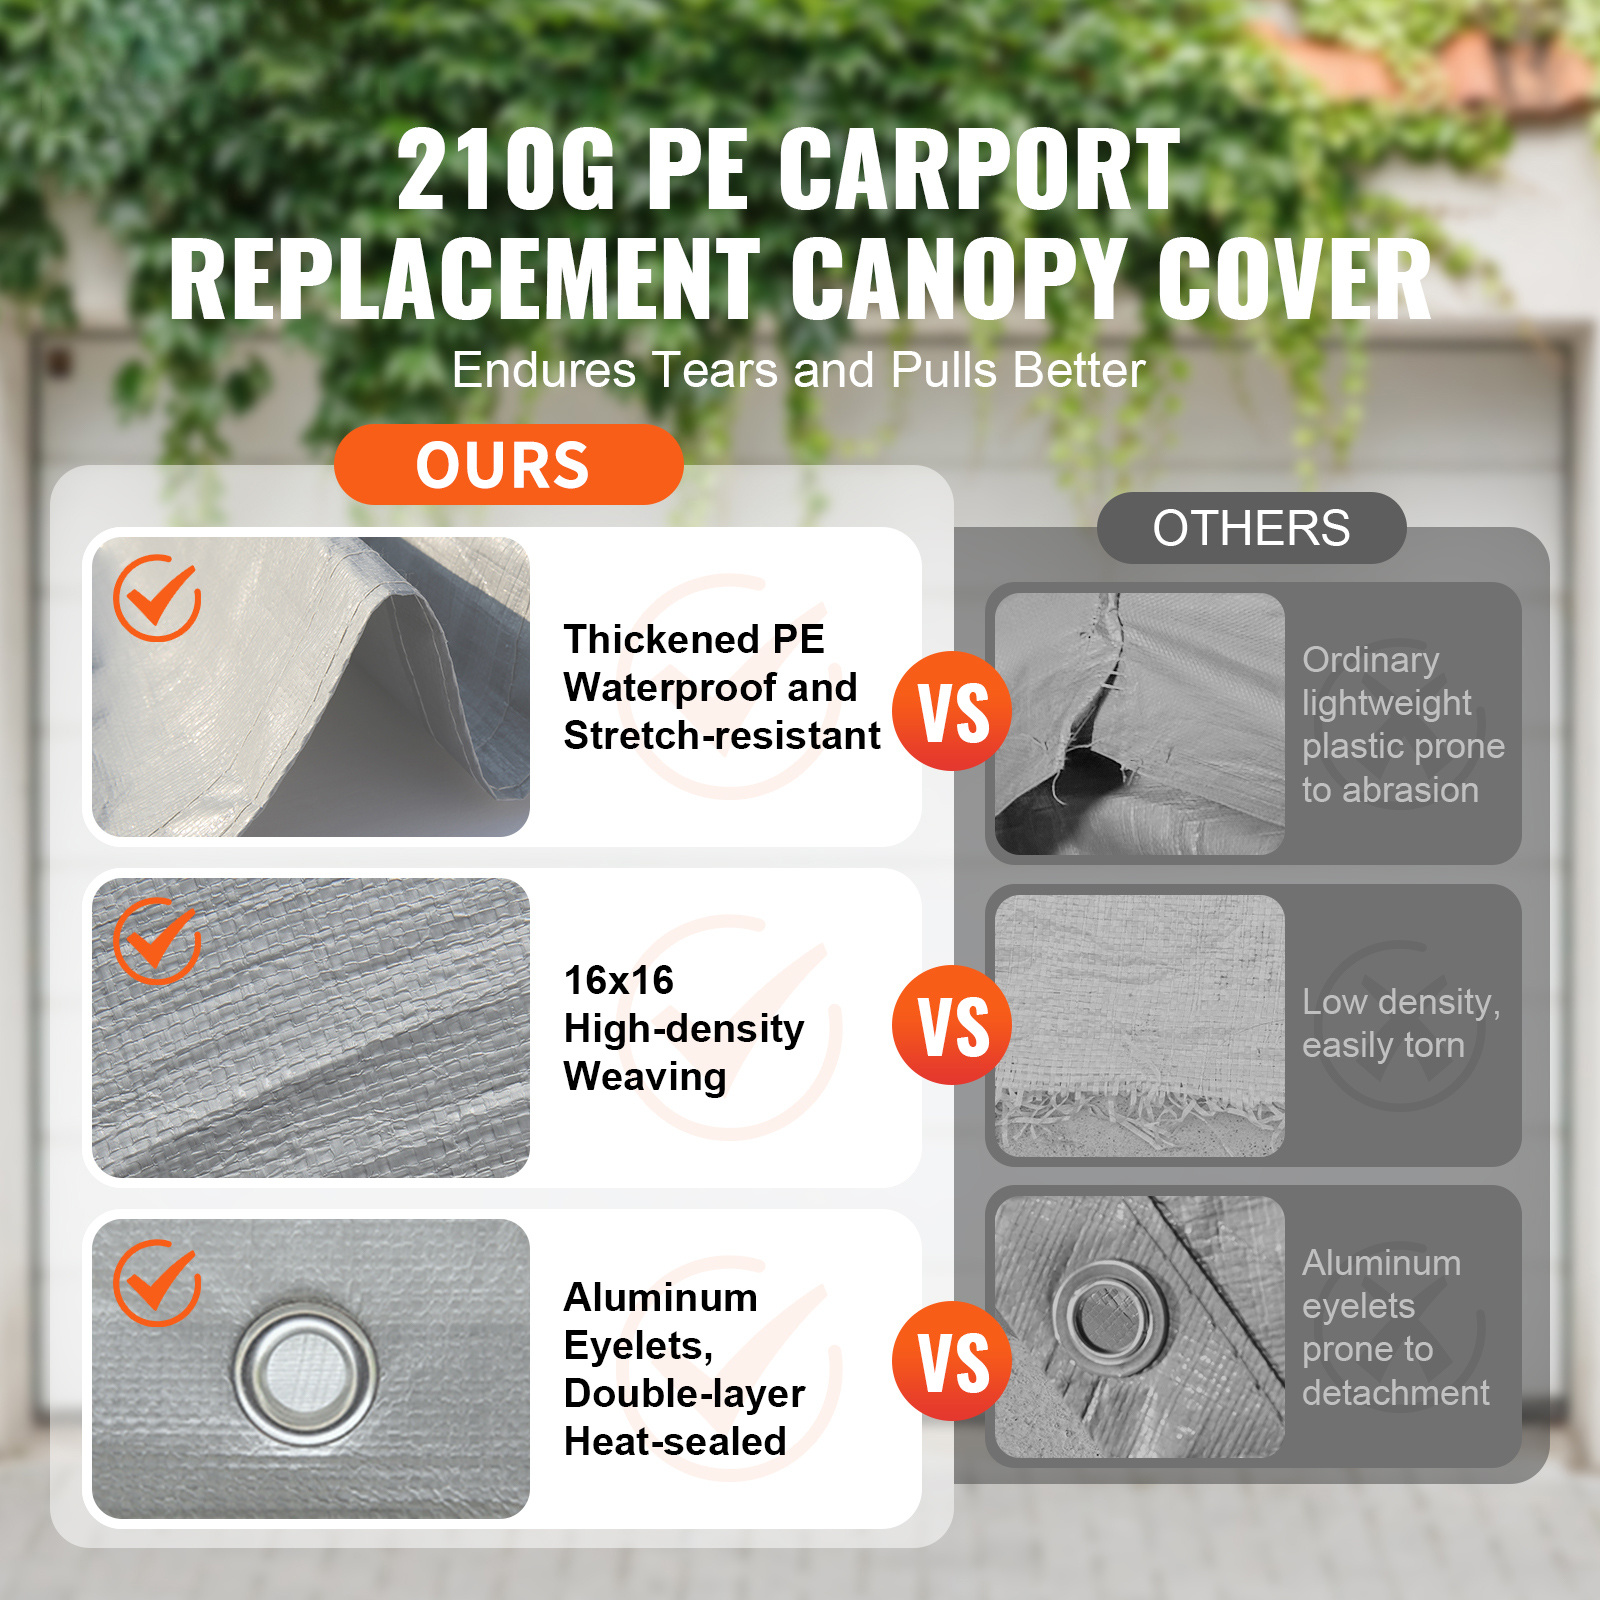 

Carport Replacement Canopy Cover 10 X 20 Ft, Garage Top Tent Shelter Tarp Heavy-duty Waterproof & Uv Protected, Easy Installation With Ball Bungees,grey (only Top Cover, Frame Not Include)